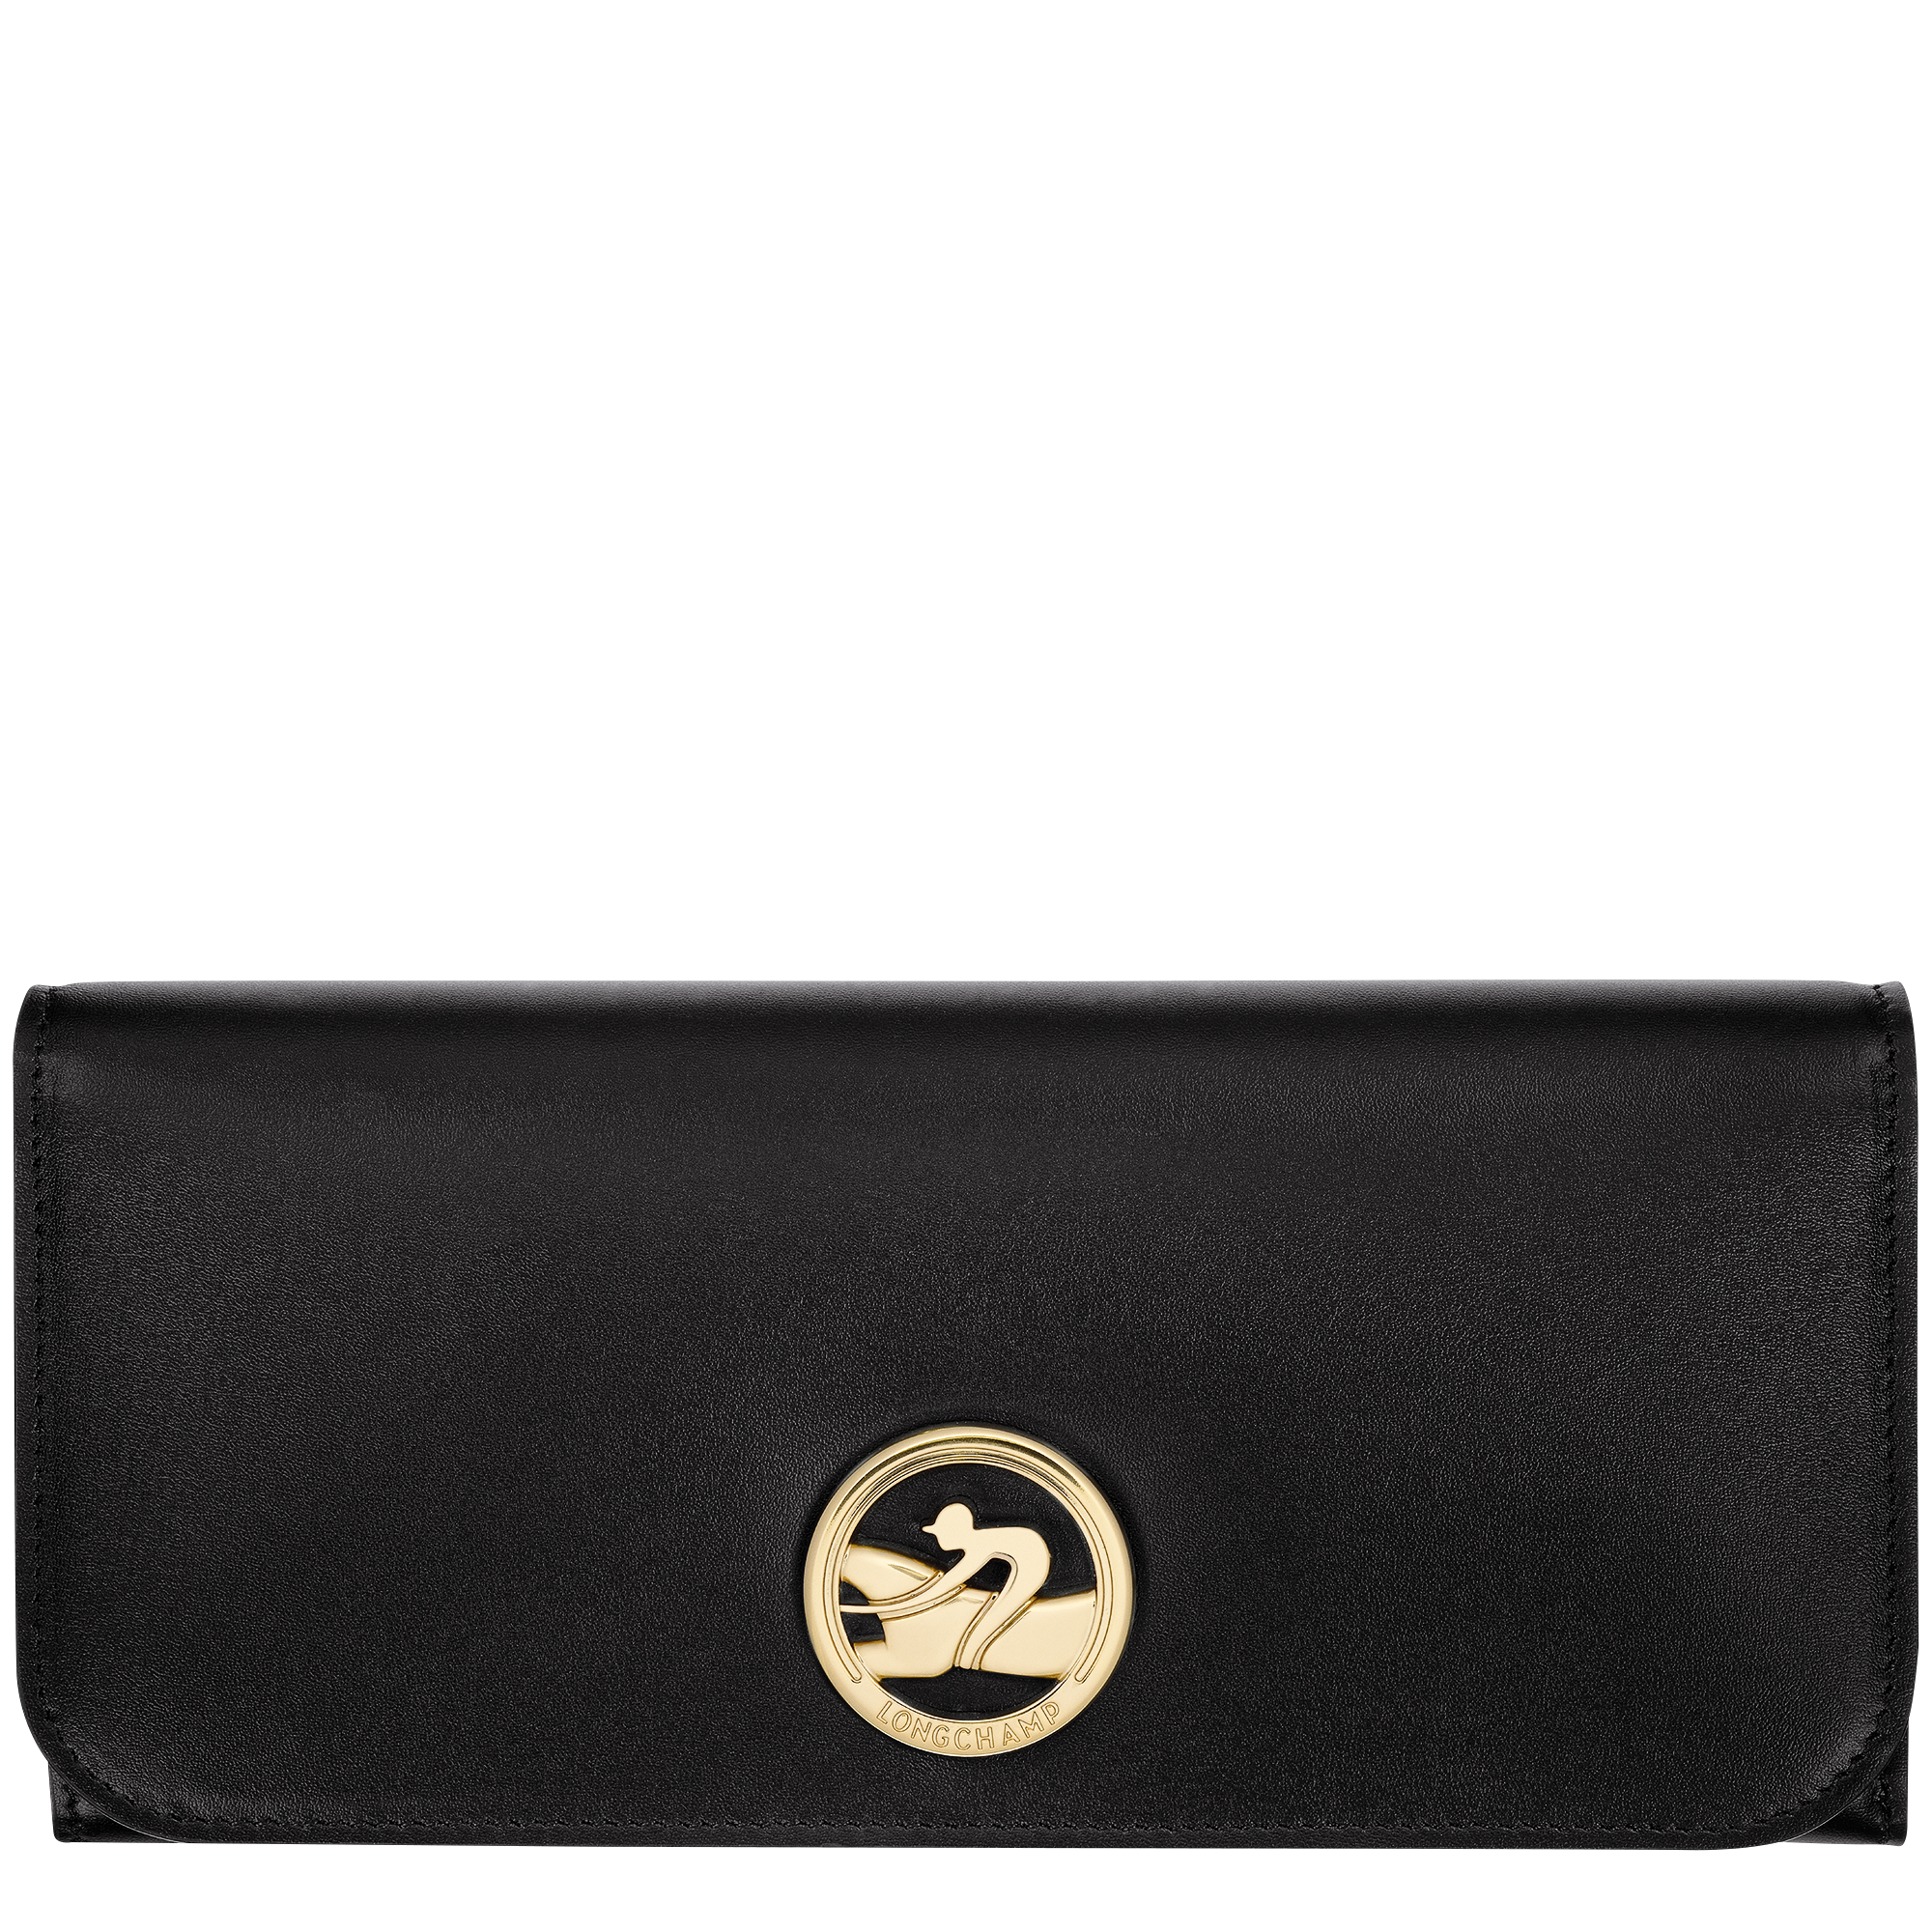 Front view of Longchamp Box-Trot Continental Wallet in Black Leather (SKU: L3044HAU001)